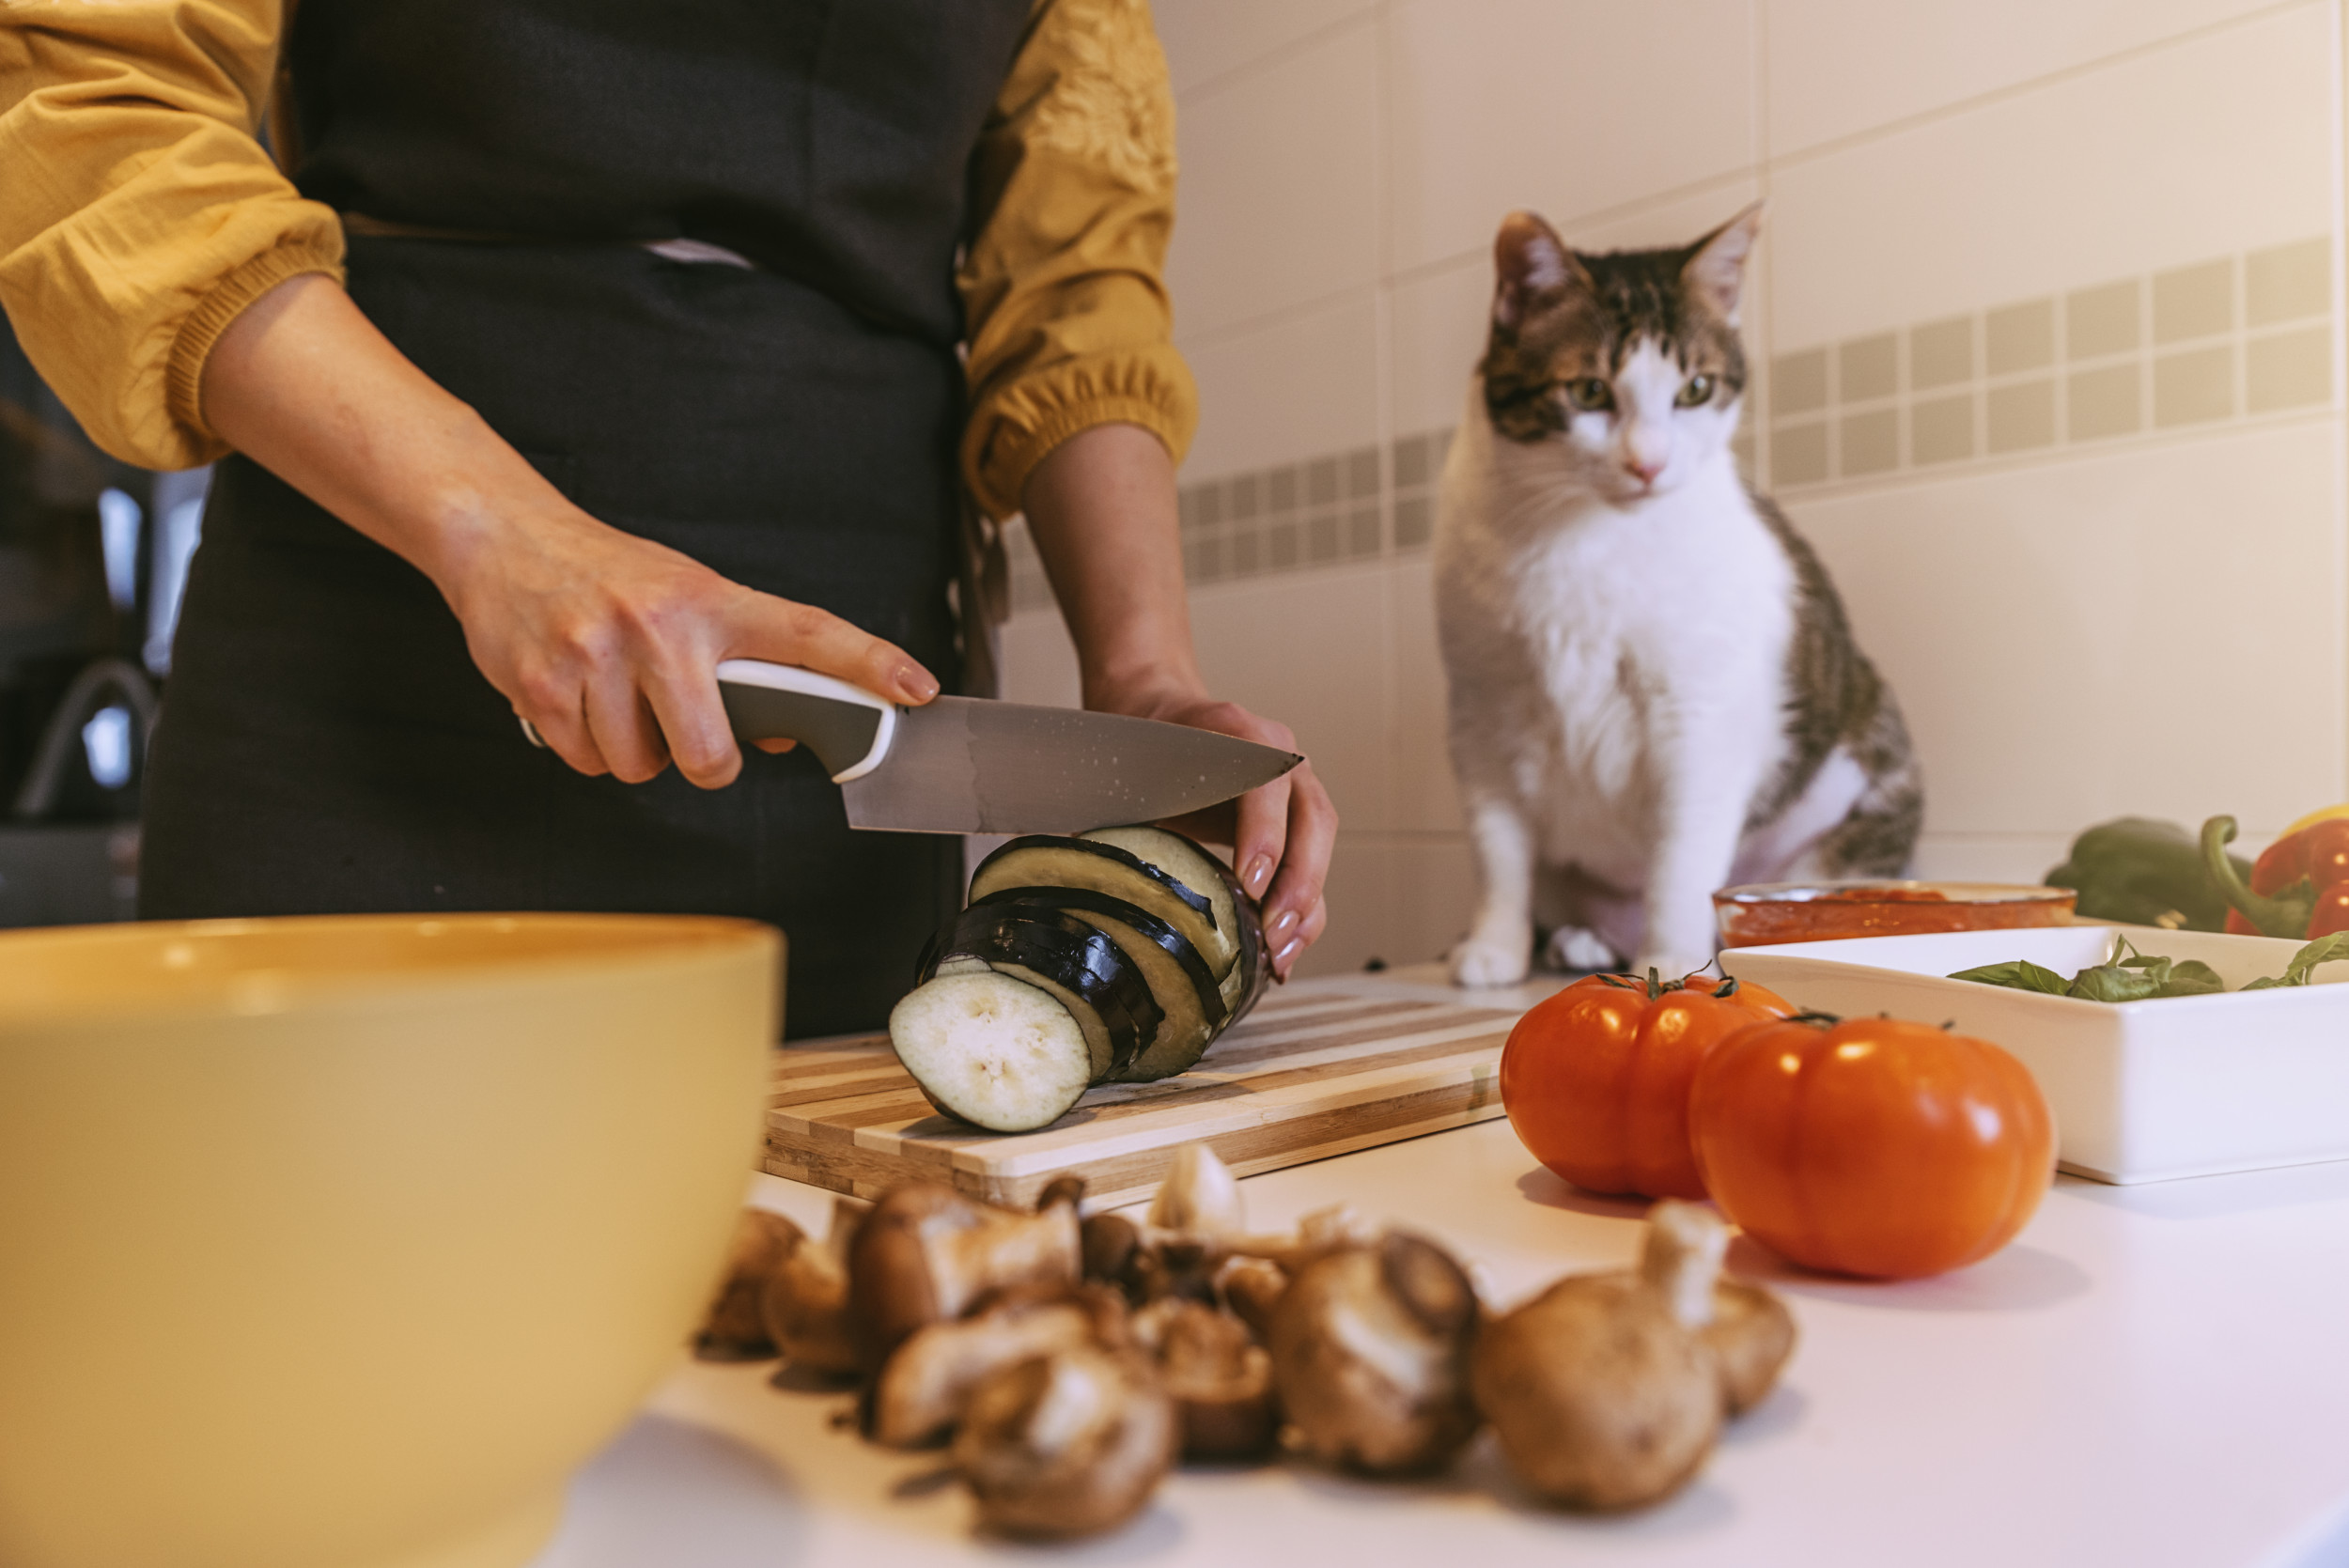 Confused Cat Crying As Owner Chops Onions Has Internet in Hysterics